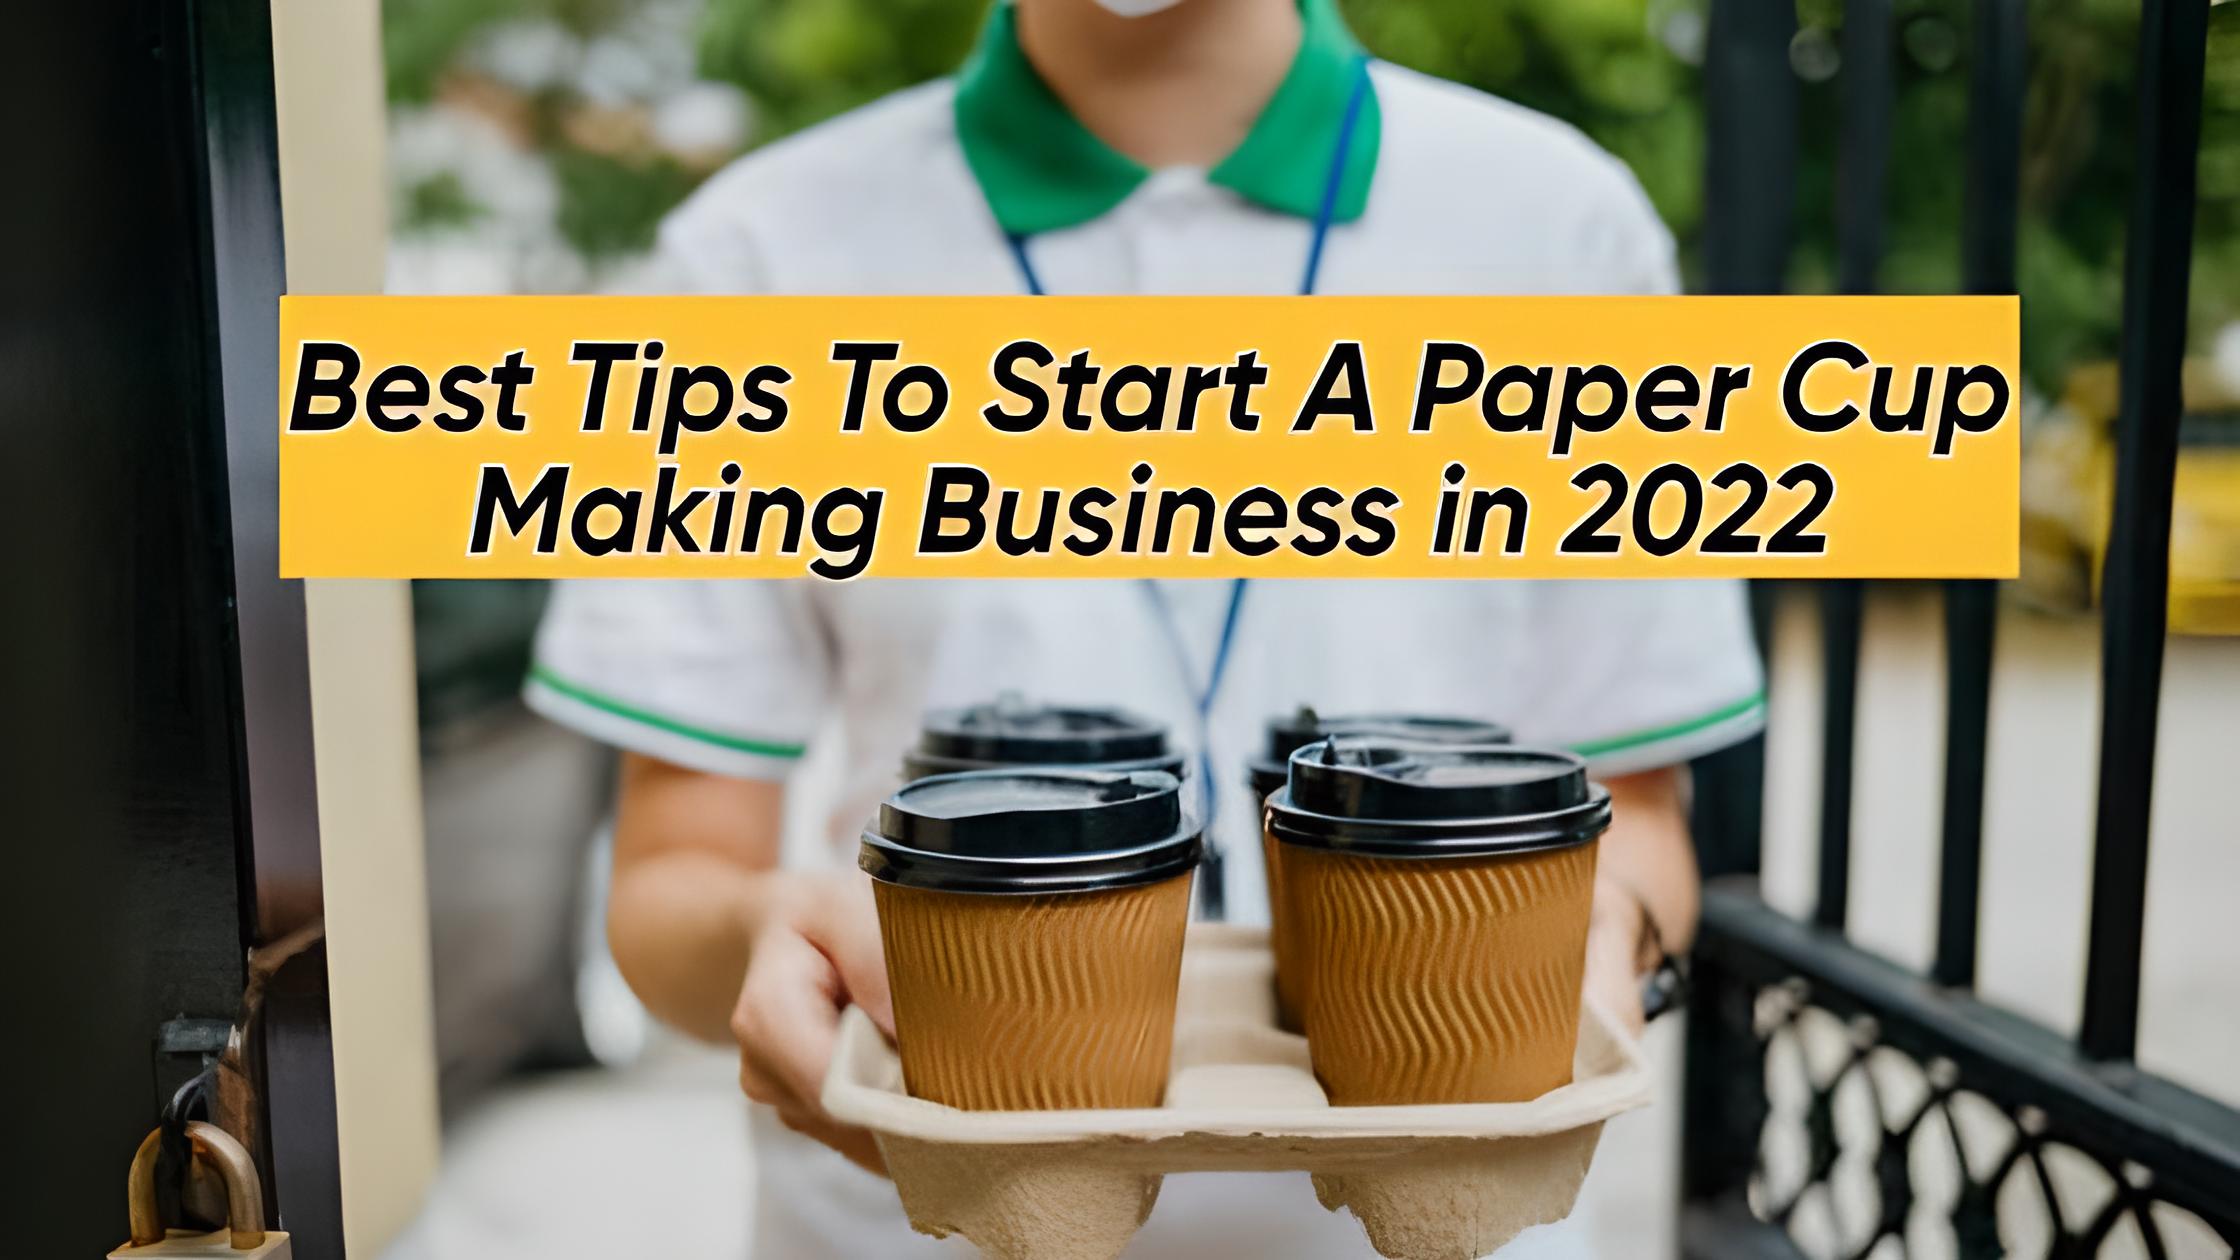 Start A Paper Cup Making Business